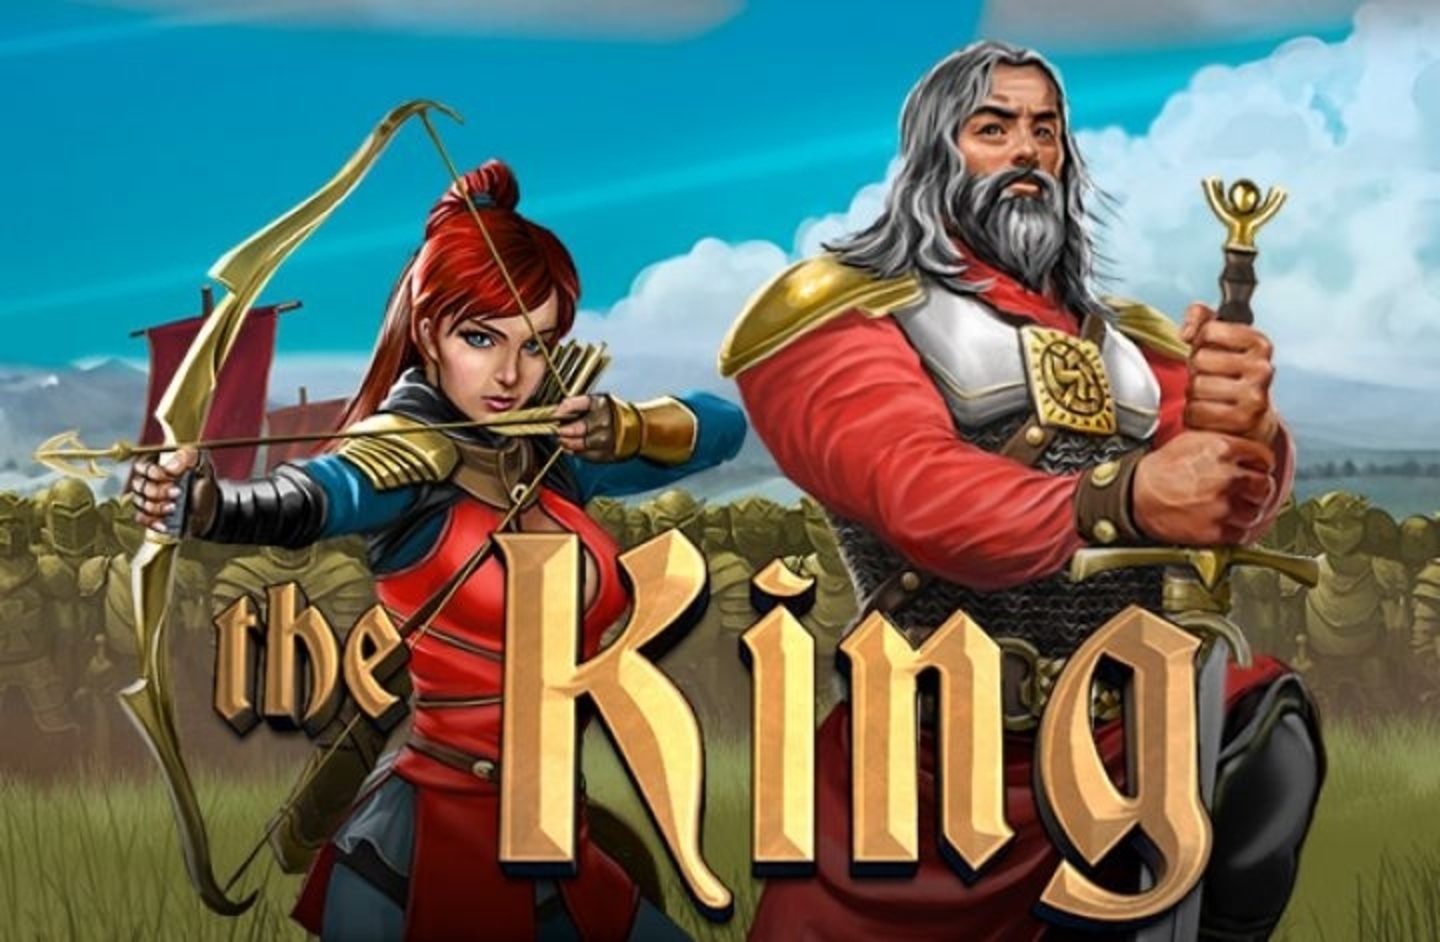 The The King Online Slot Demo Game by Endorphina